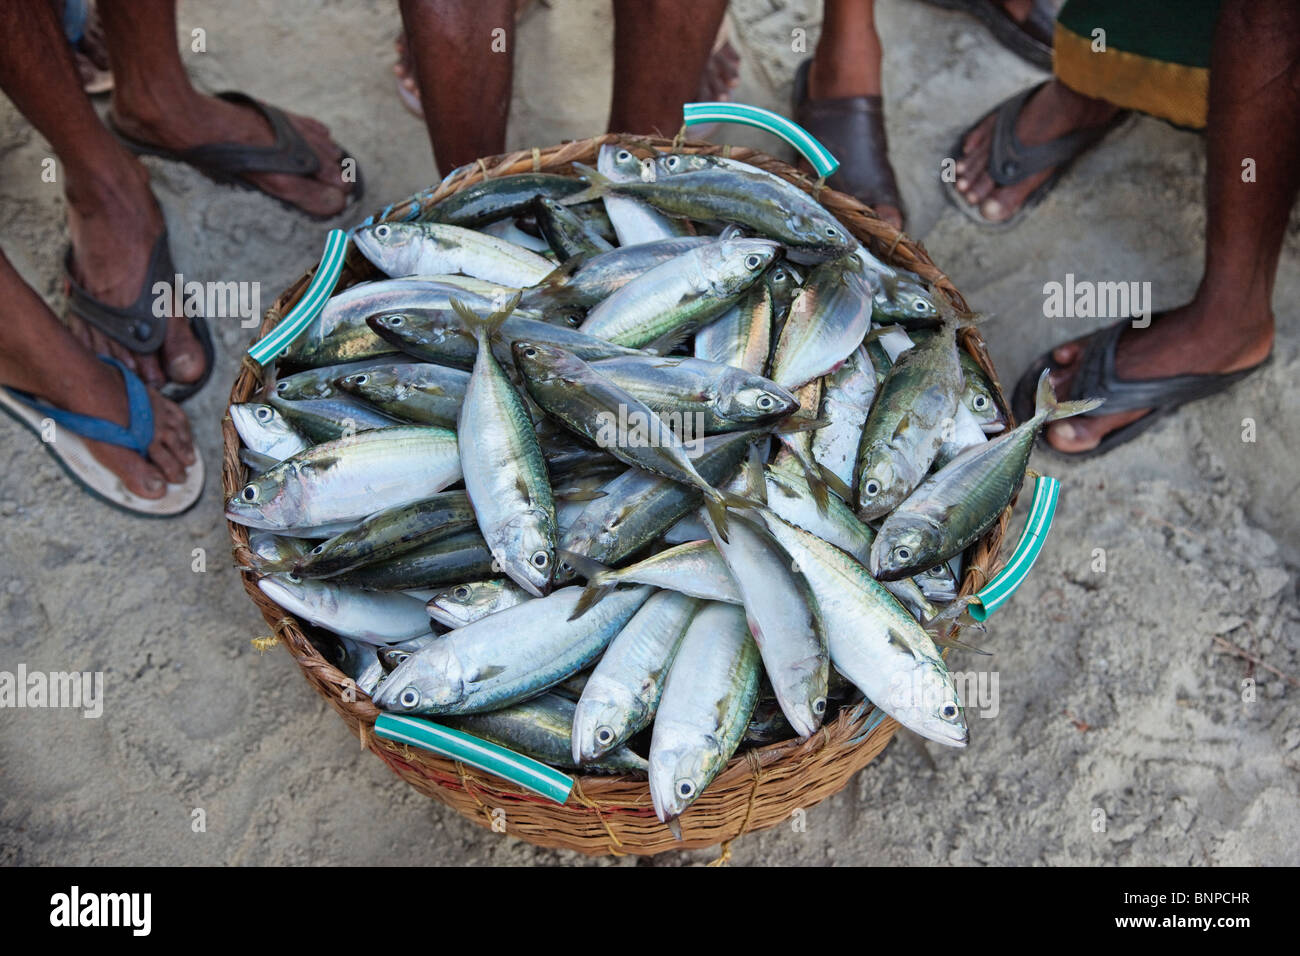 The feet of fisherman with their daily catch at the fishing village Fort Kochi. Kochi, Kerala, India. Stock Photo